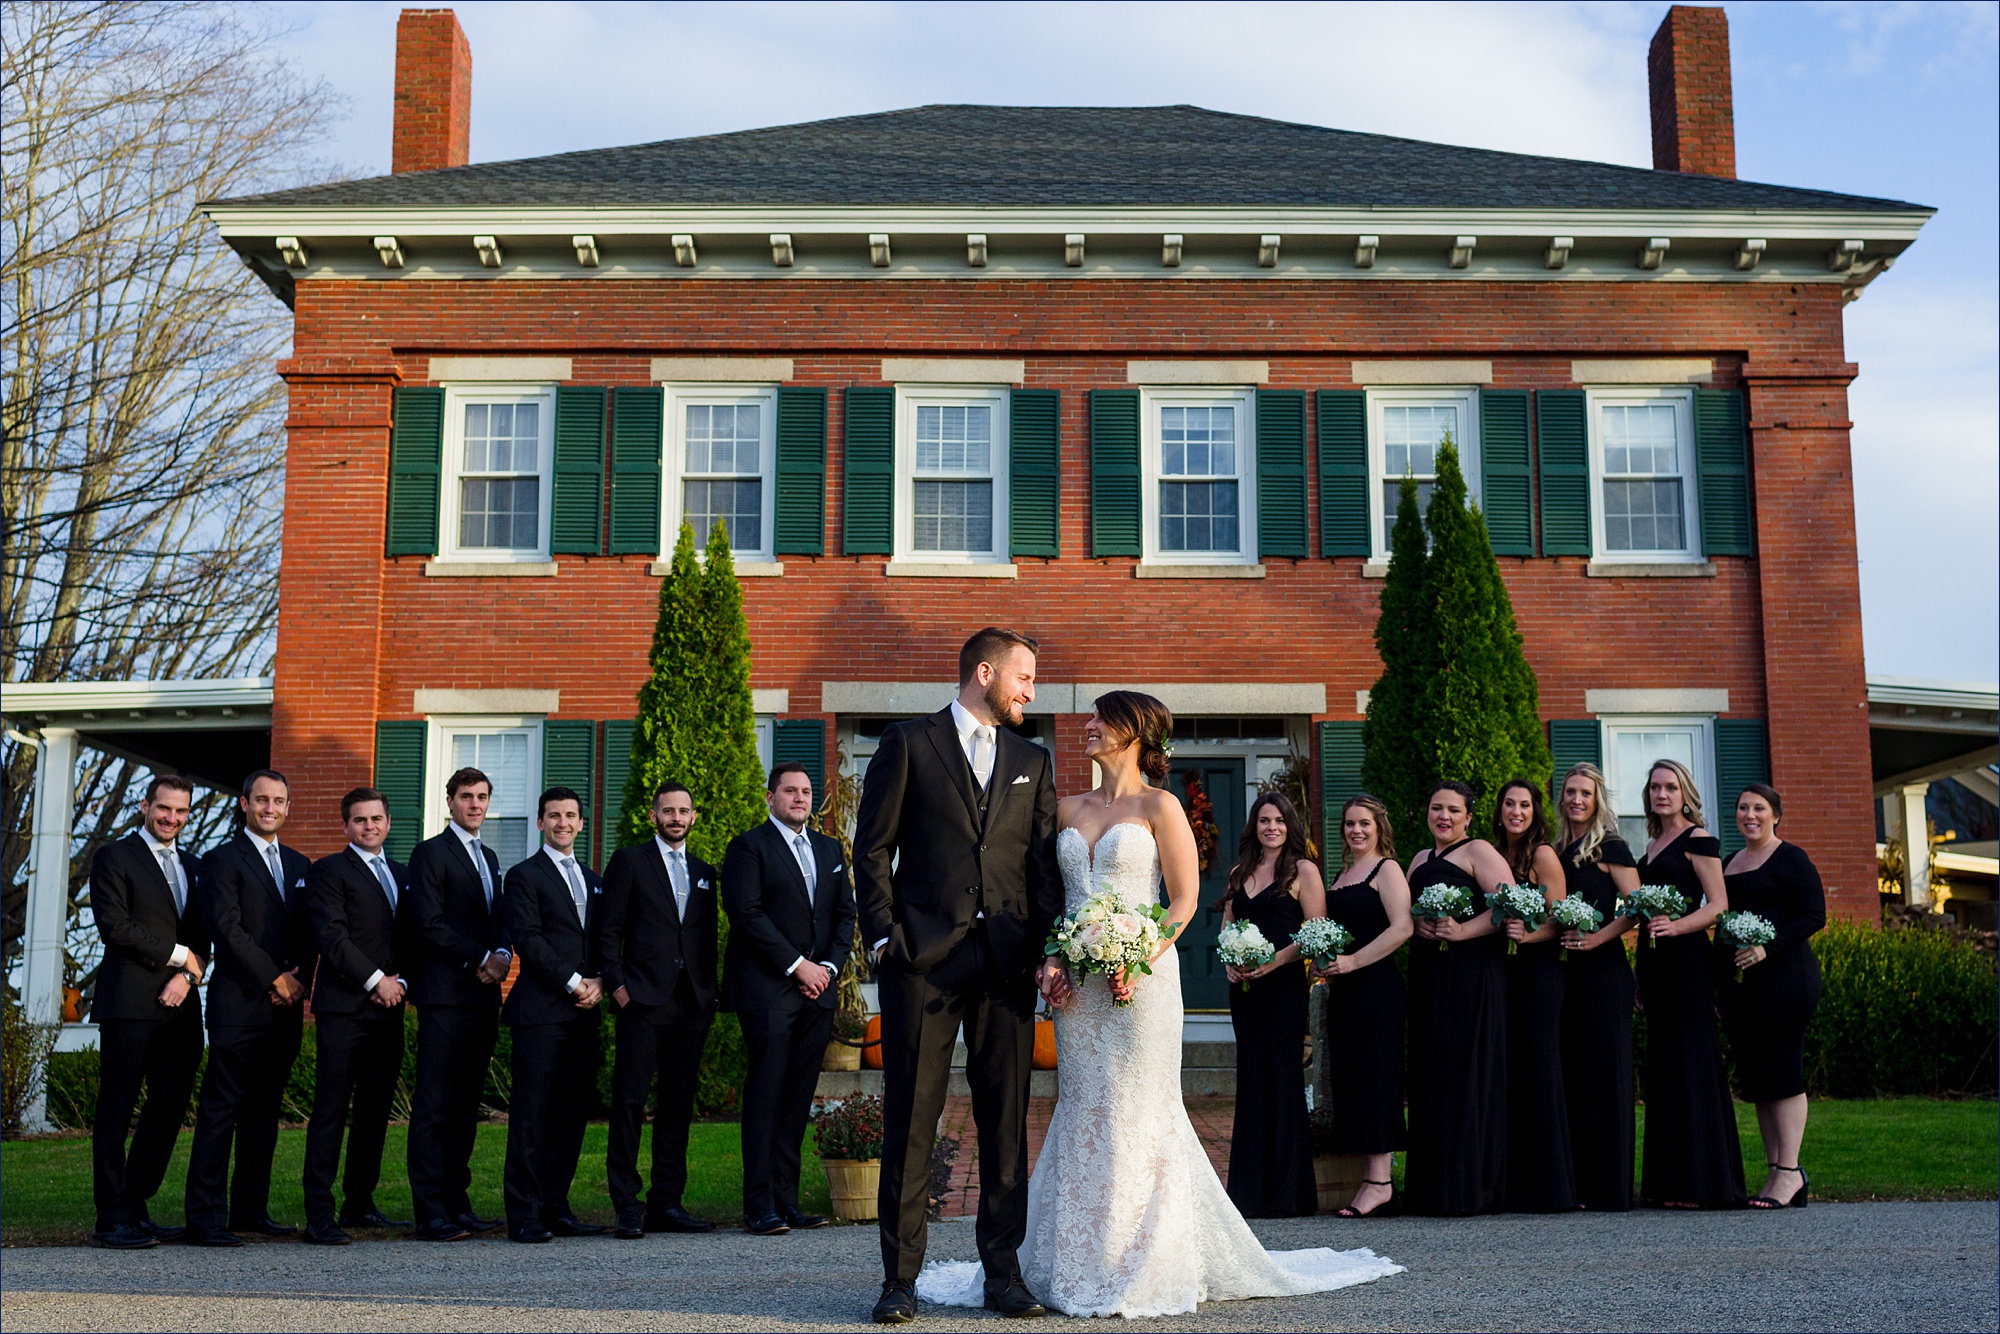 The wedding party stands together at The Red Barn at Outlook Farm in Maine